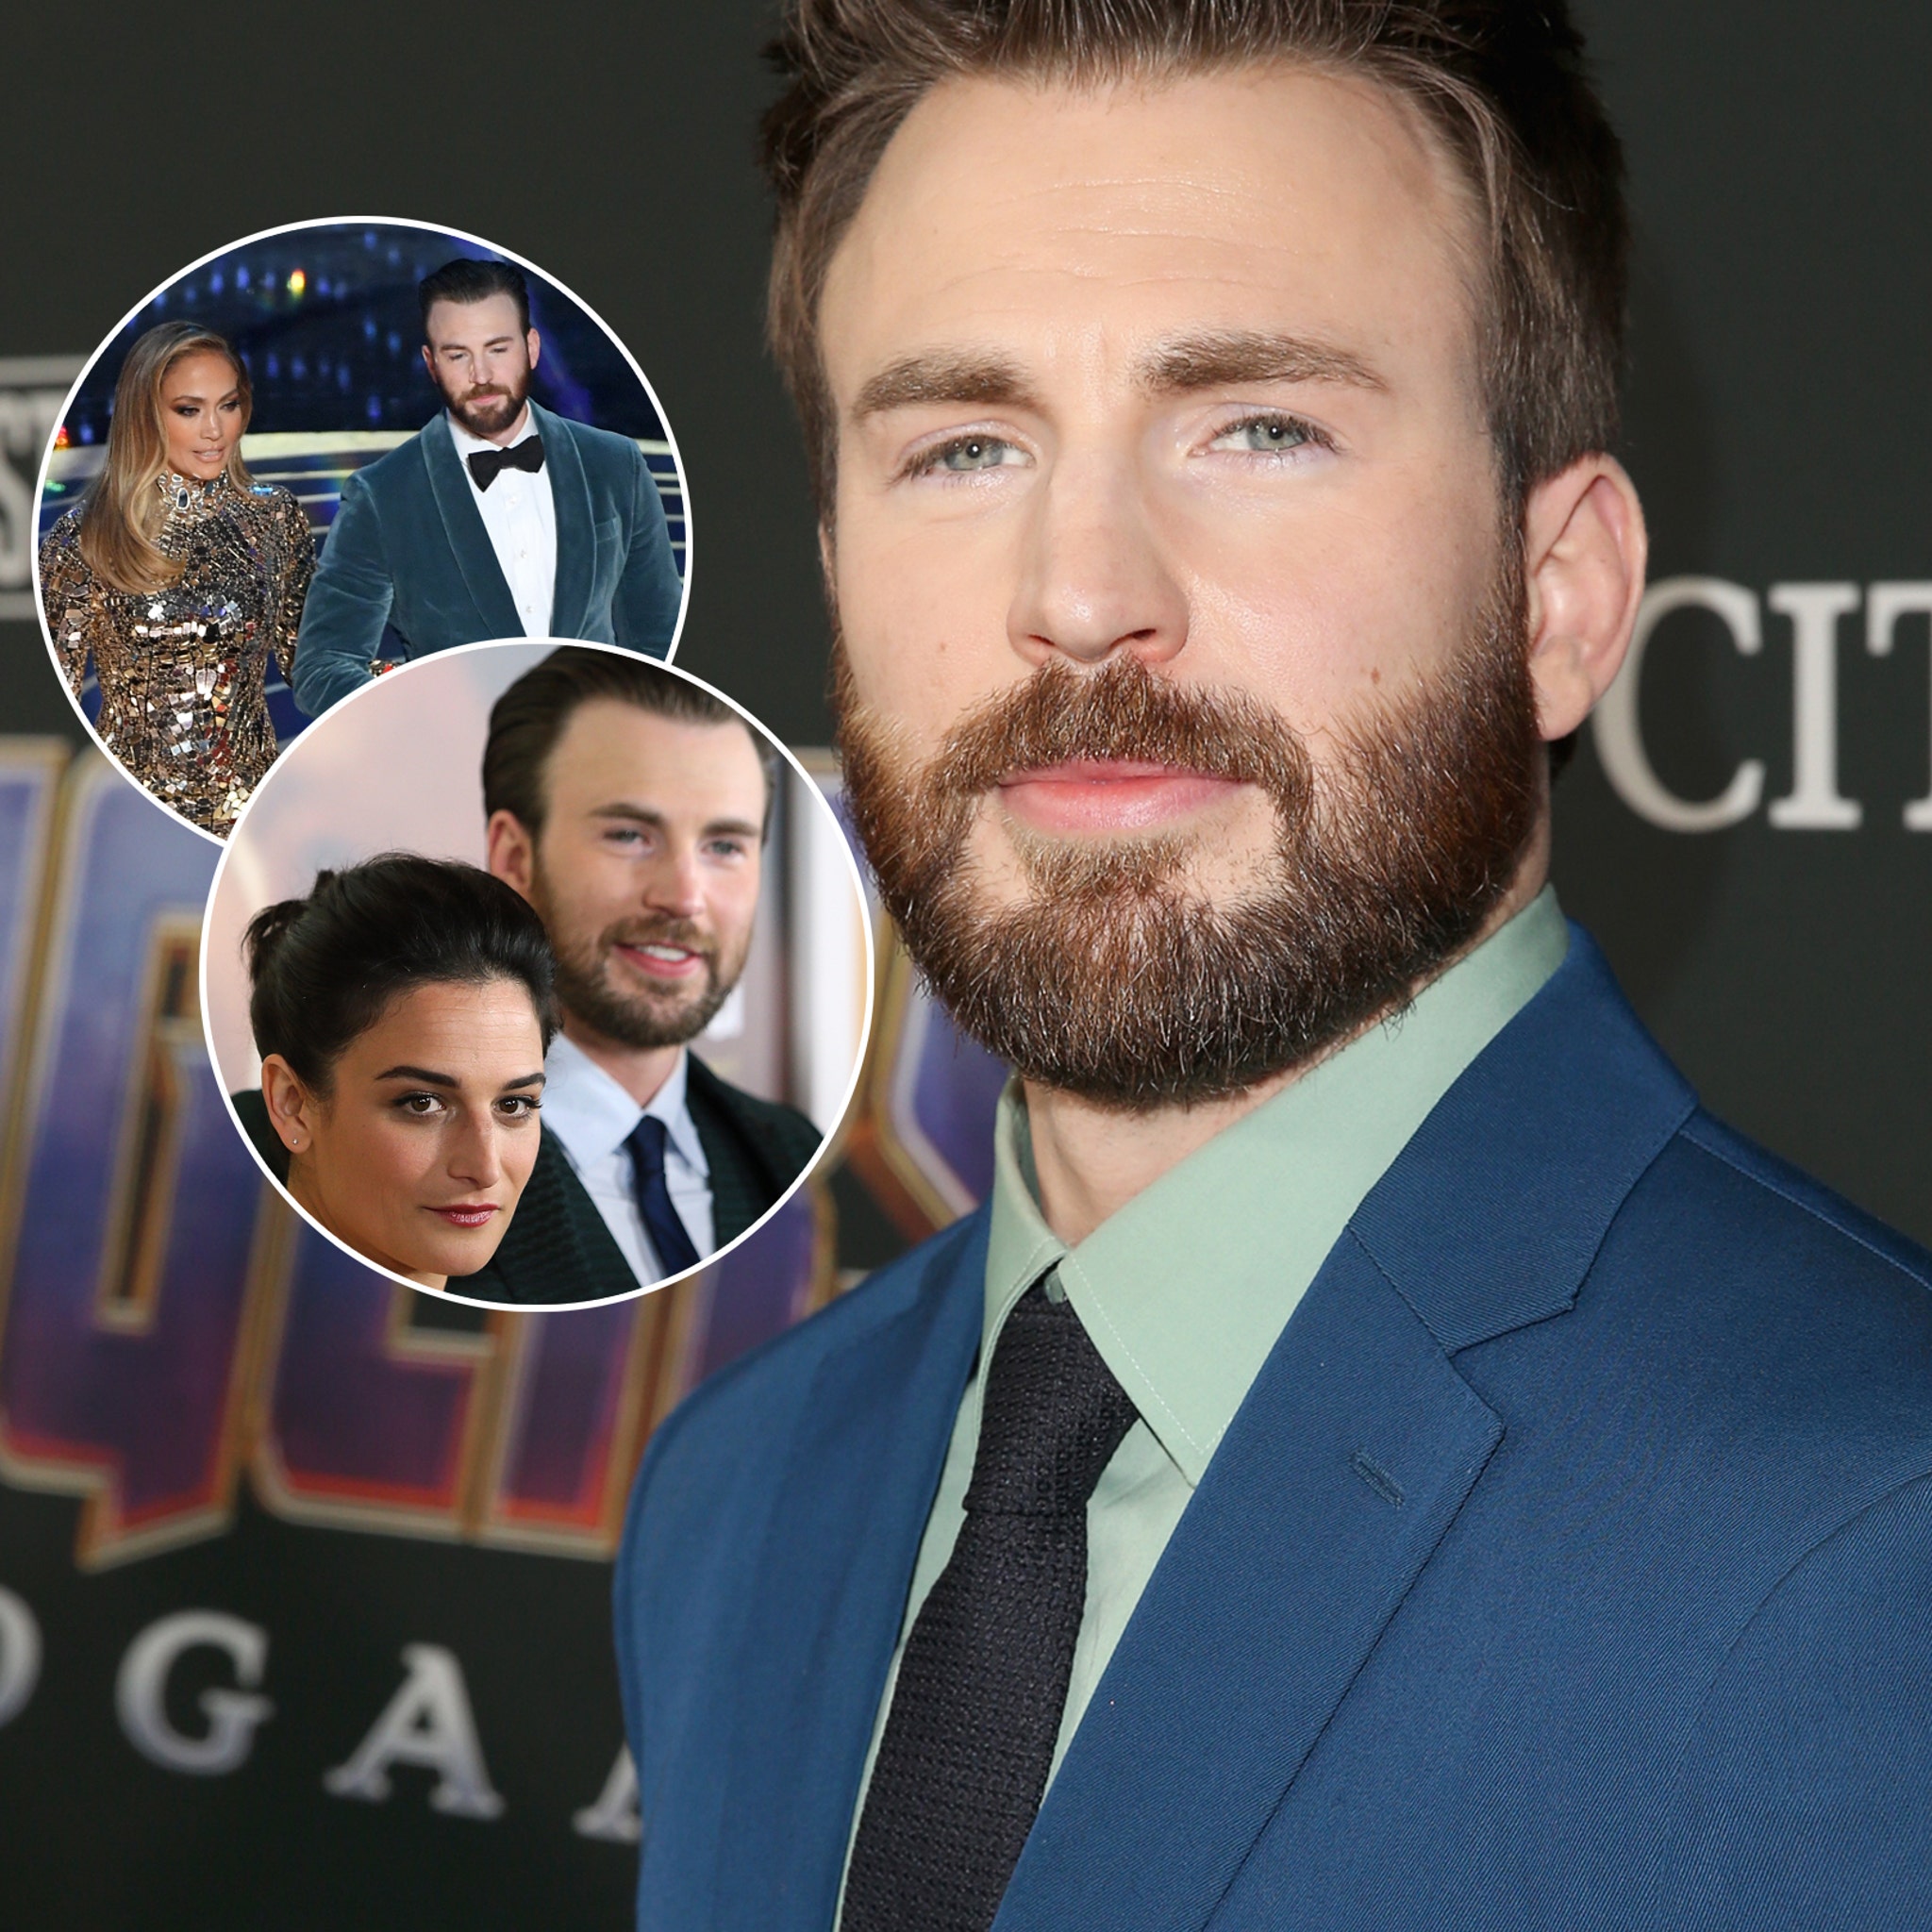 Chris Evans Wife And Kids : Chris Evans Rare Photos Family Girlfriends Lifestyle Childhood Youtube - To verify, just follow the link in the message.